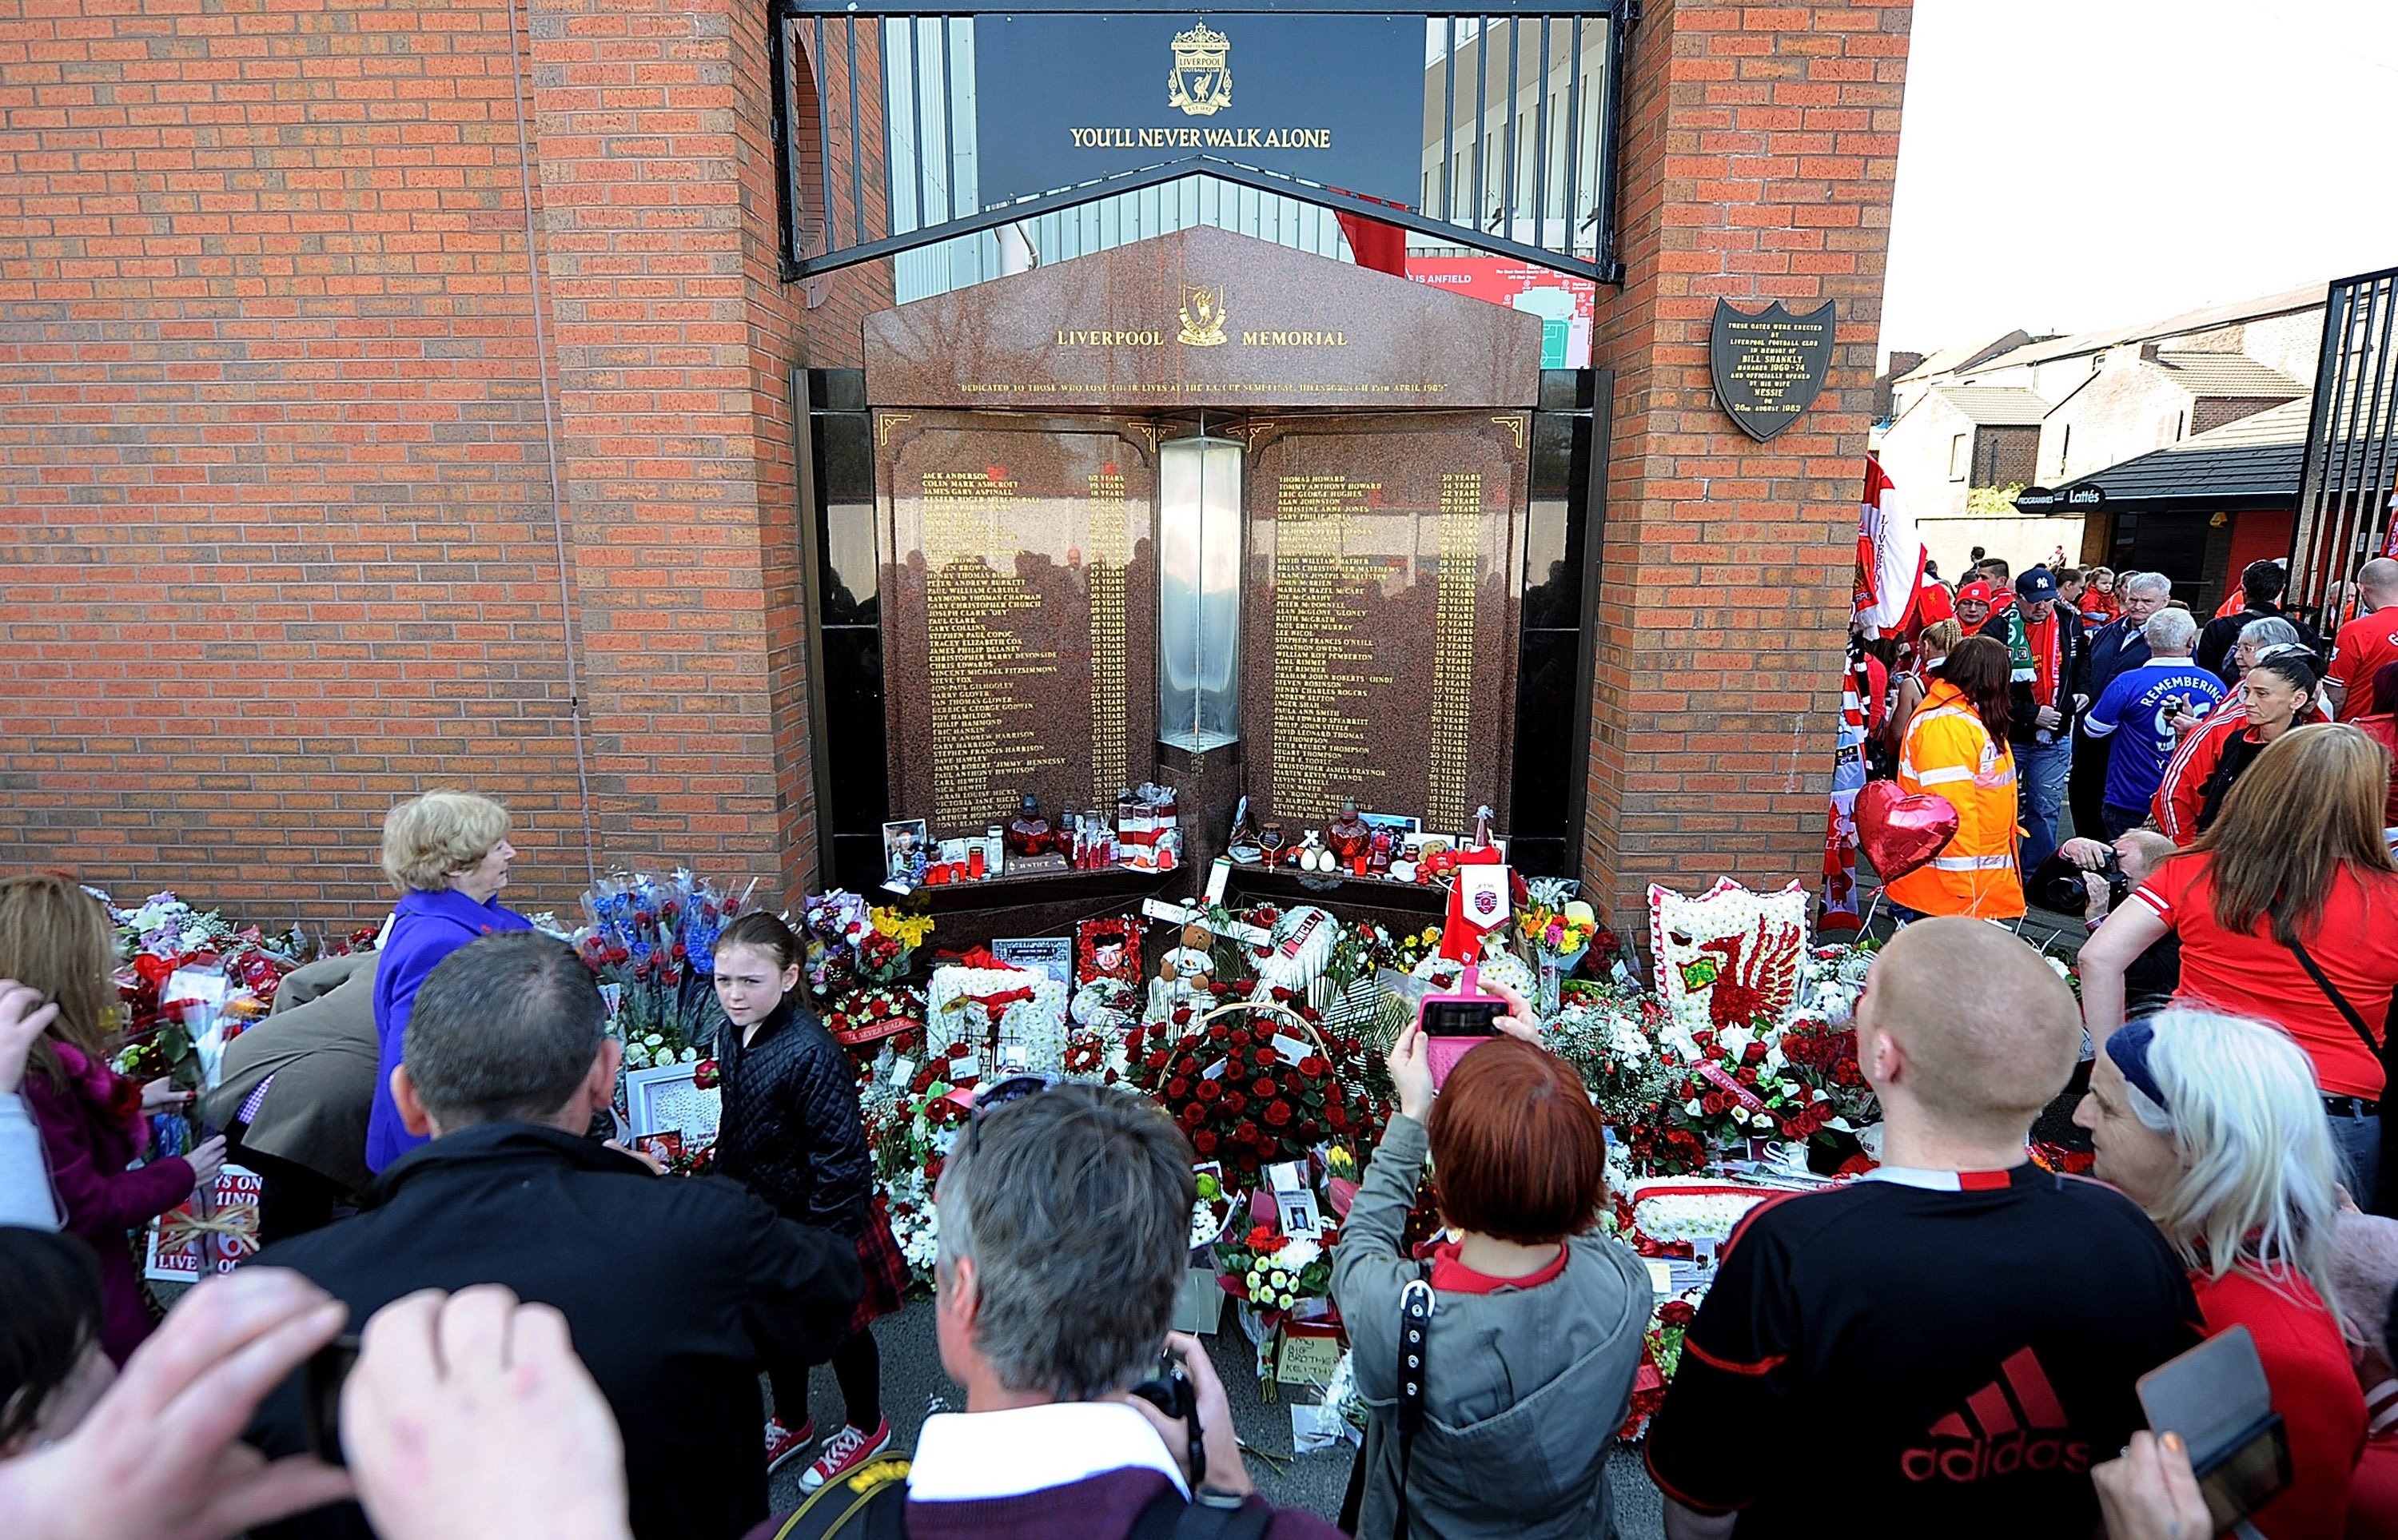 Fans gather at the Hillsborough memorial during the memorial service marking the 25th anniversary of the Hillsborough Disaster, at Anfield Stadium on April 15, 2014 in Liverpool, England. | Source: Getty Images